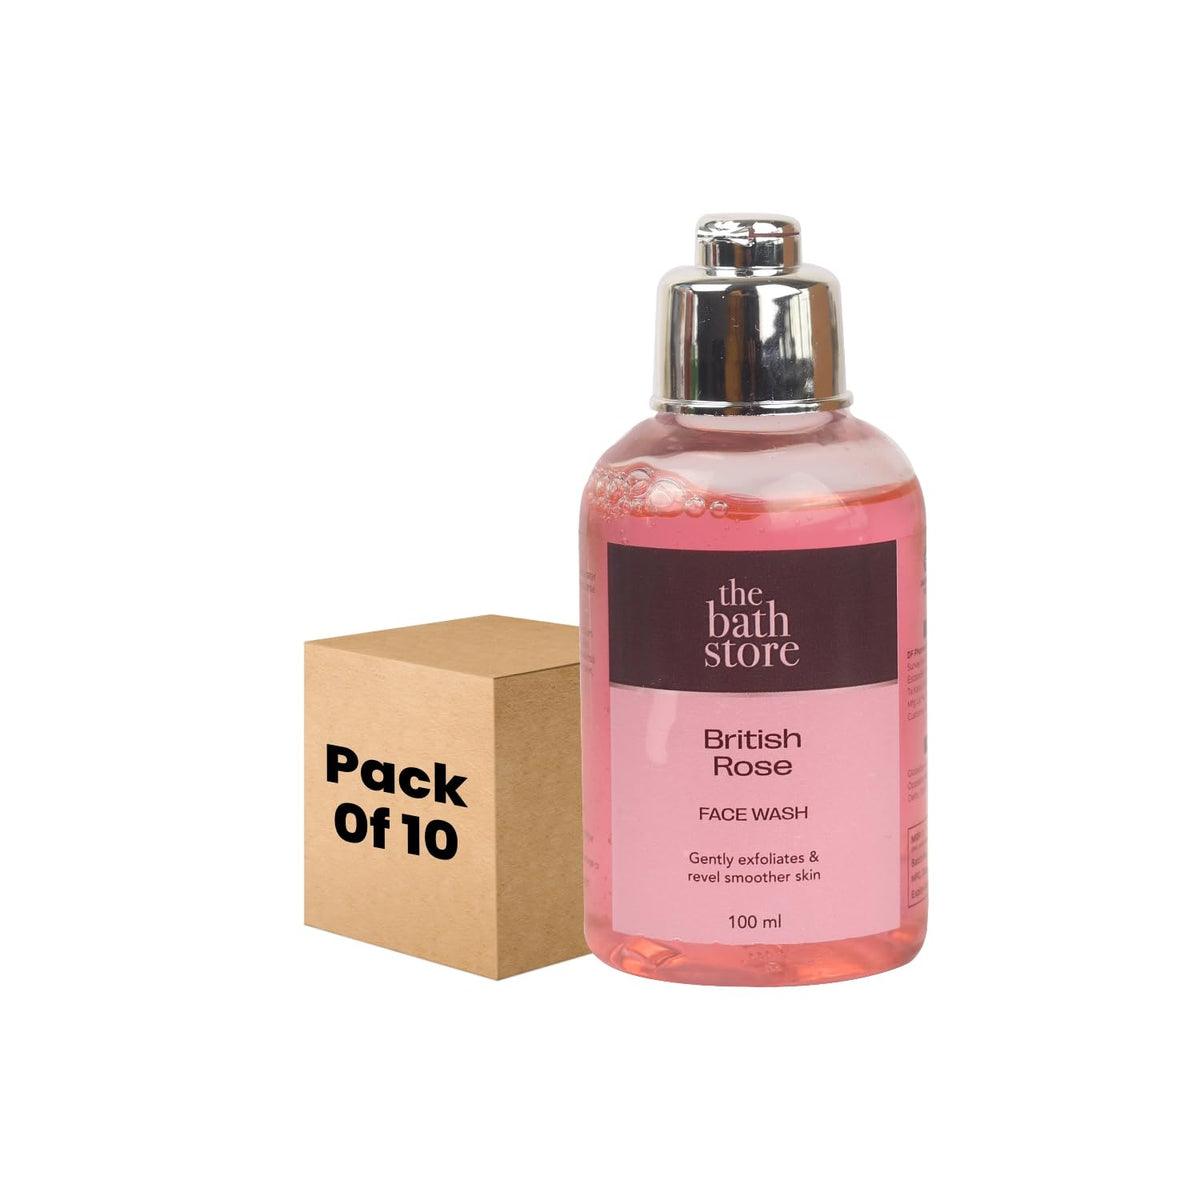 The Bath Store British Rose Face Wash - Gentle Exfoliation | Deep Cleansing - 100ml (Pack of 10)